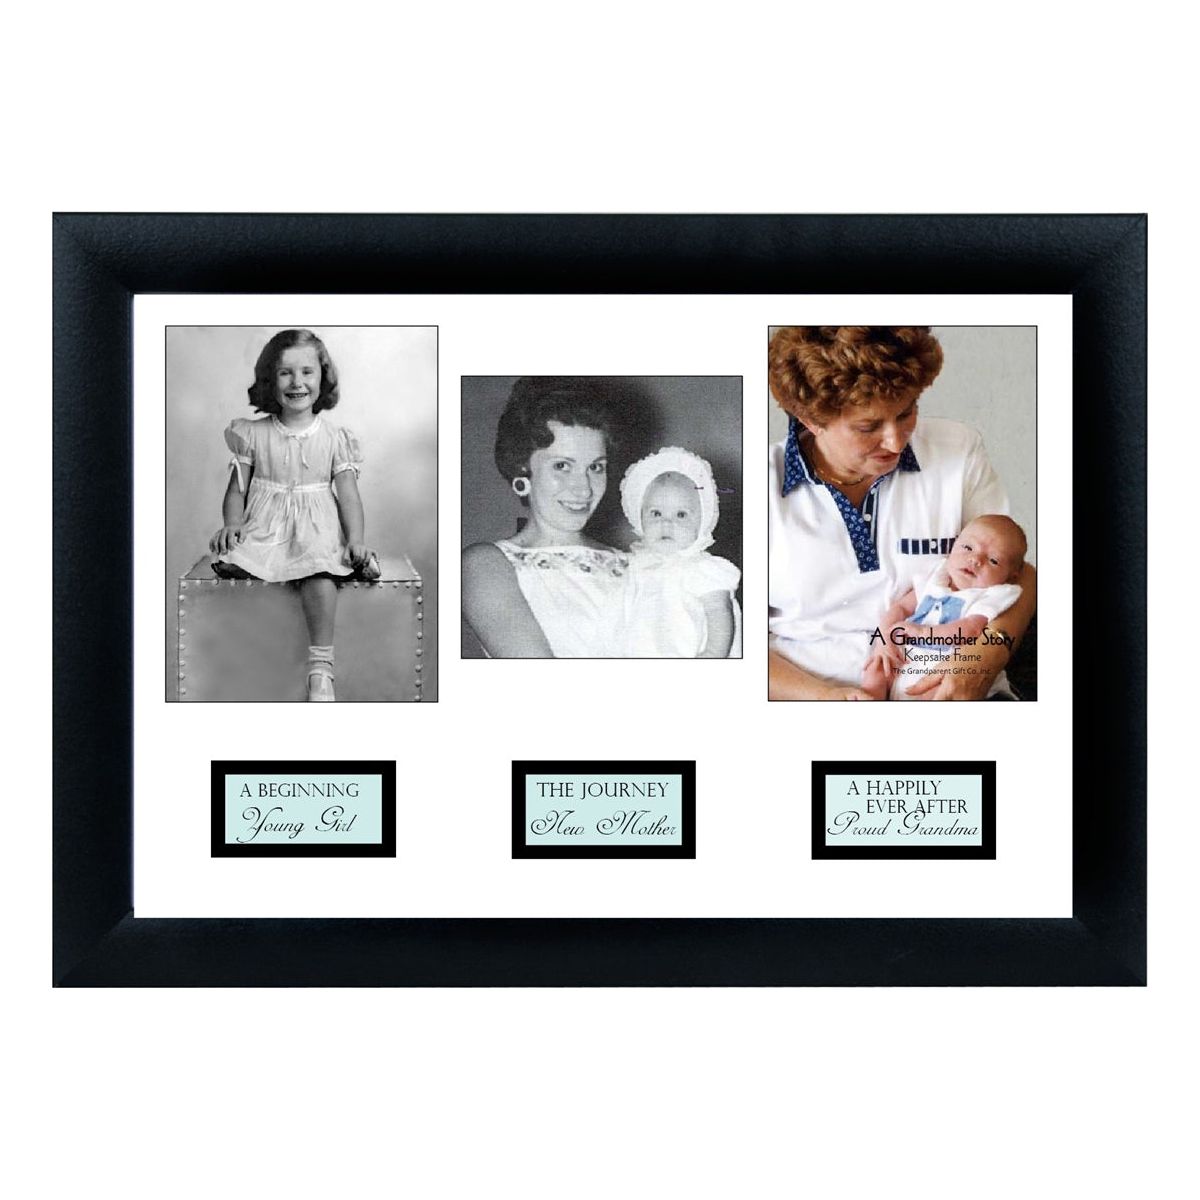 8x12 black frame for wall or table display with 3 spaces and captions for photos for a Grandma's life story.